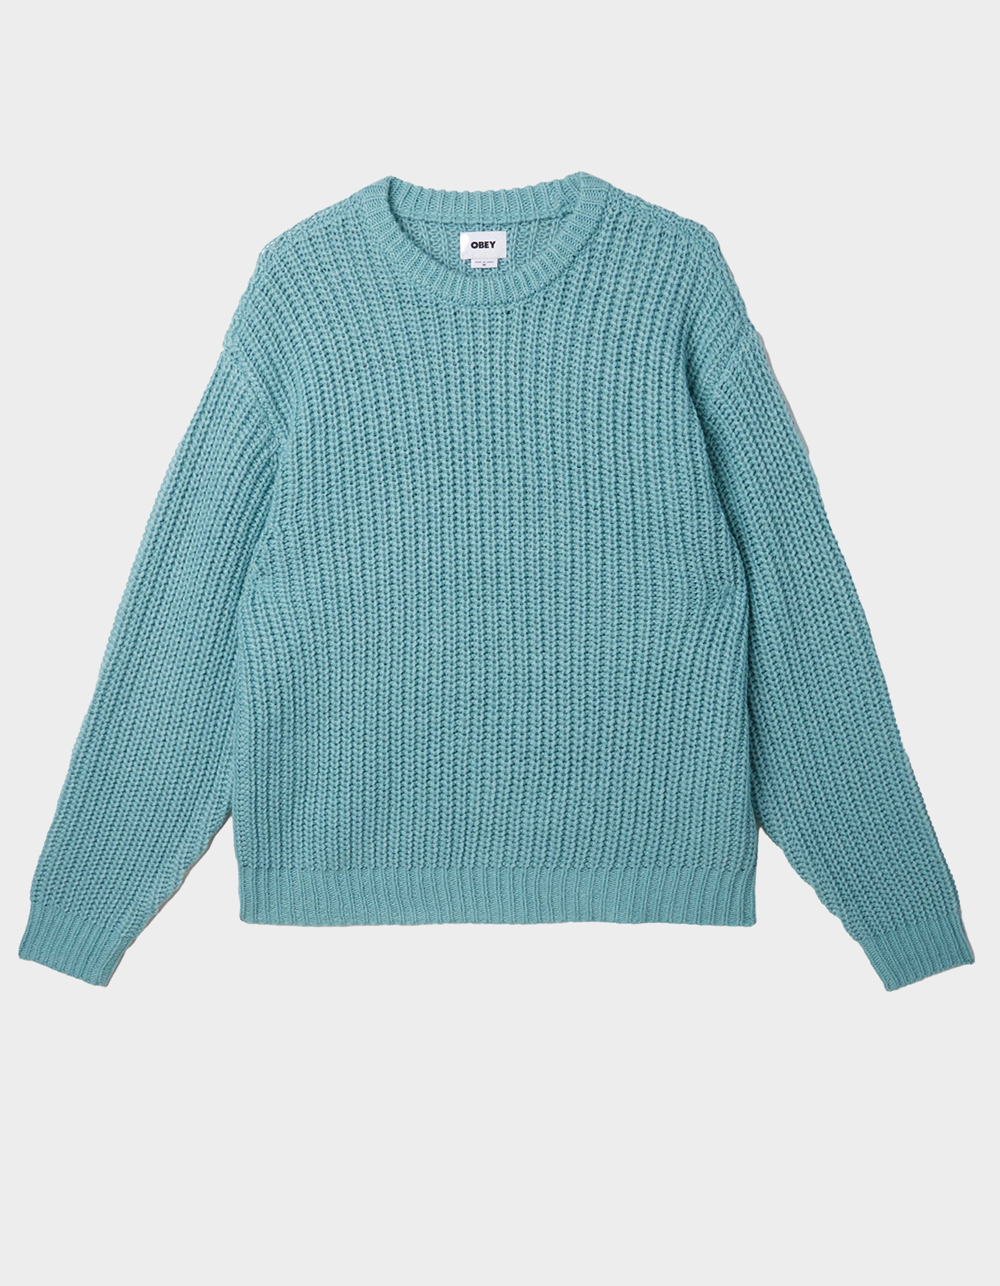 OBEY Theo Mens Sweater - LIGHT BLUE | Tillys